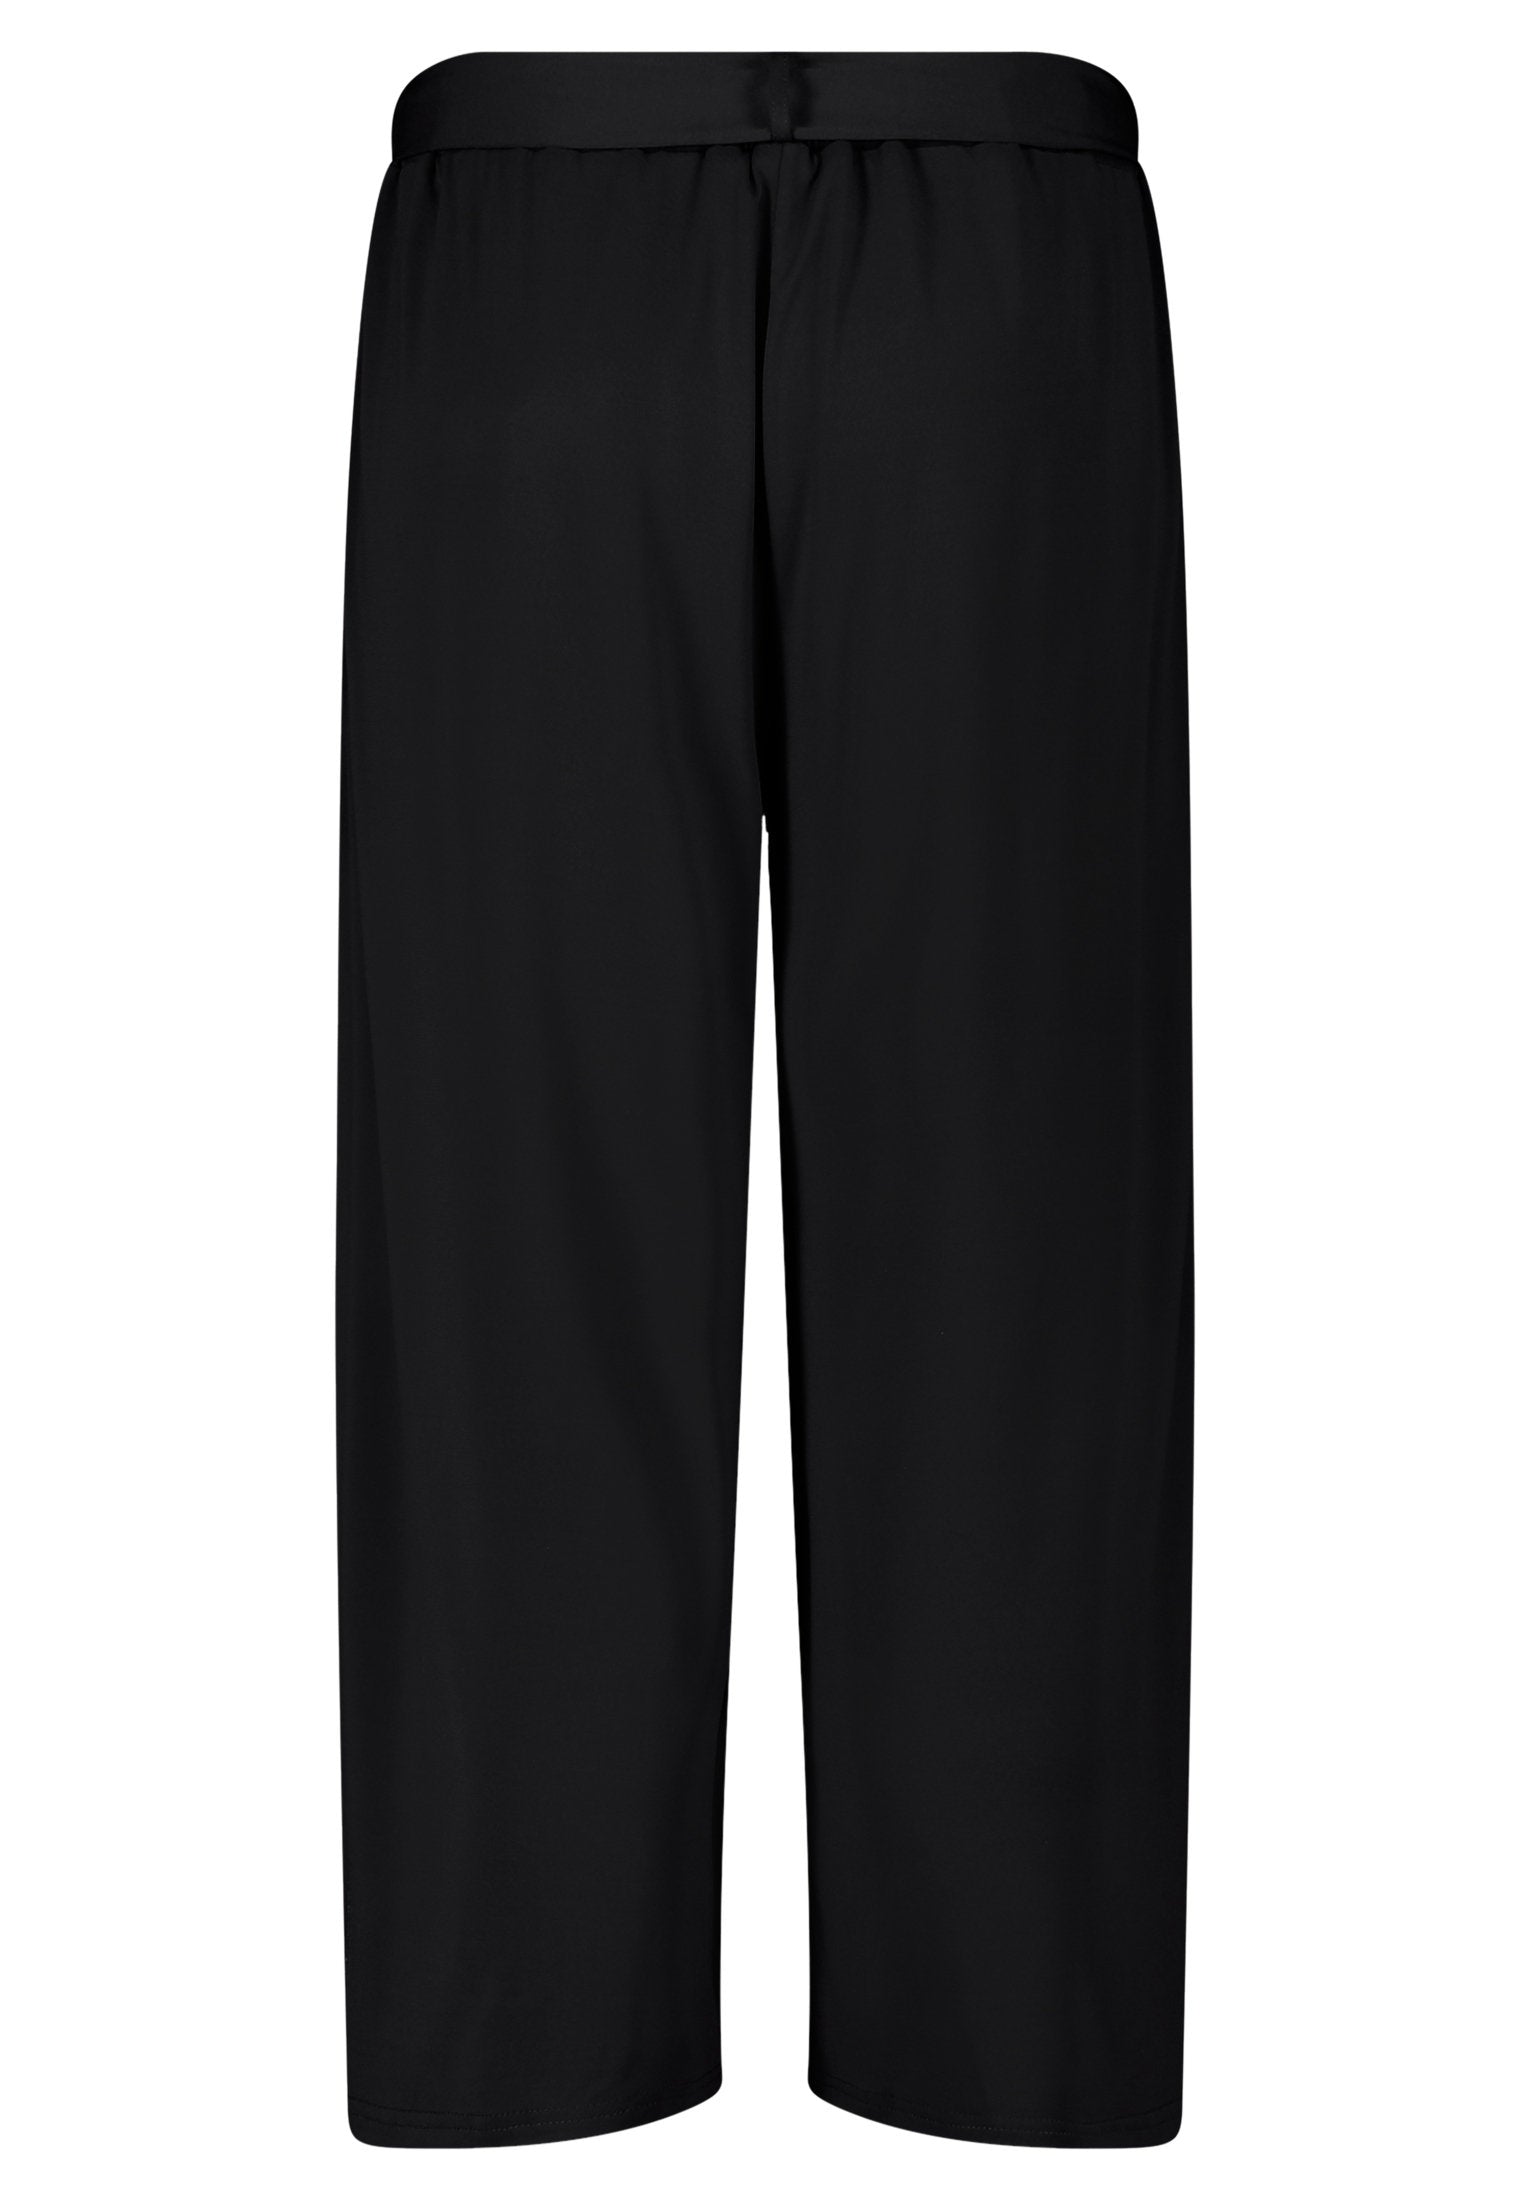 Culottes With Elastic Waistband_6808-1217_9045_02